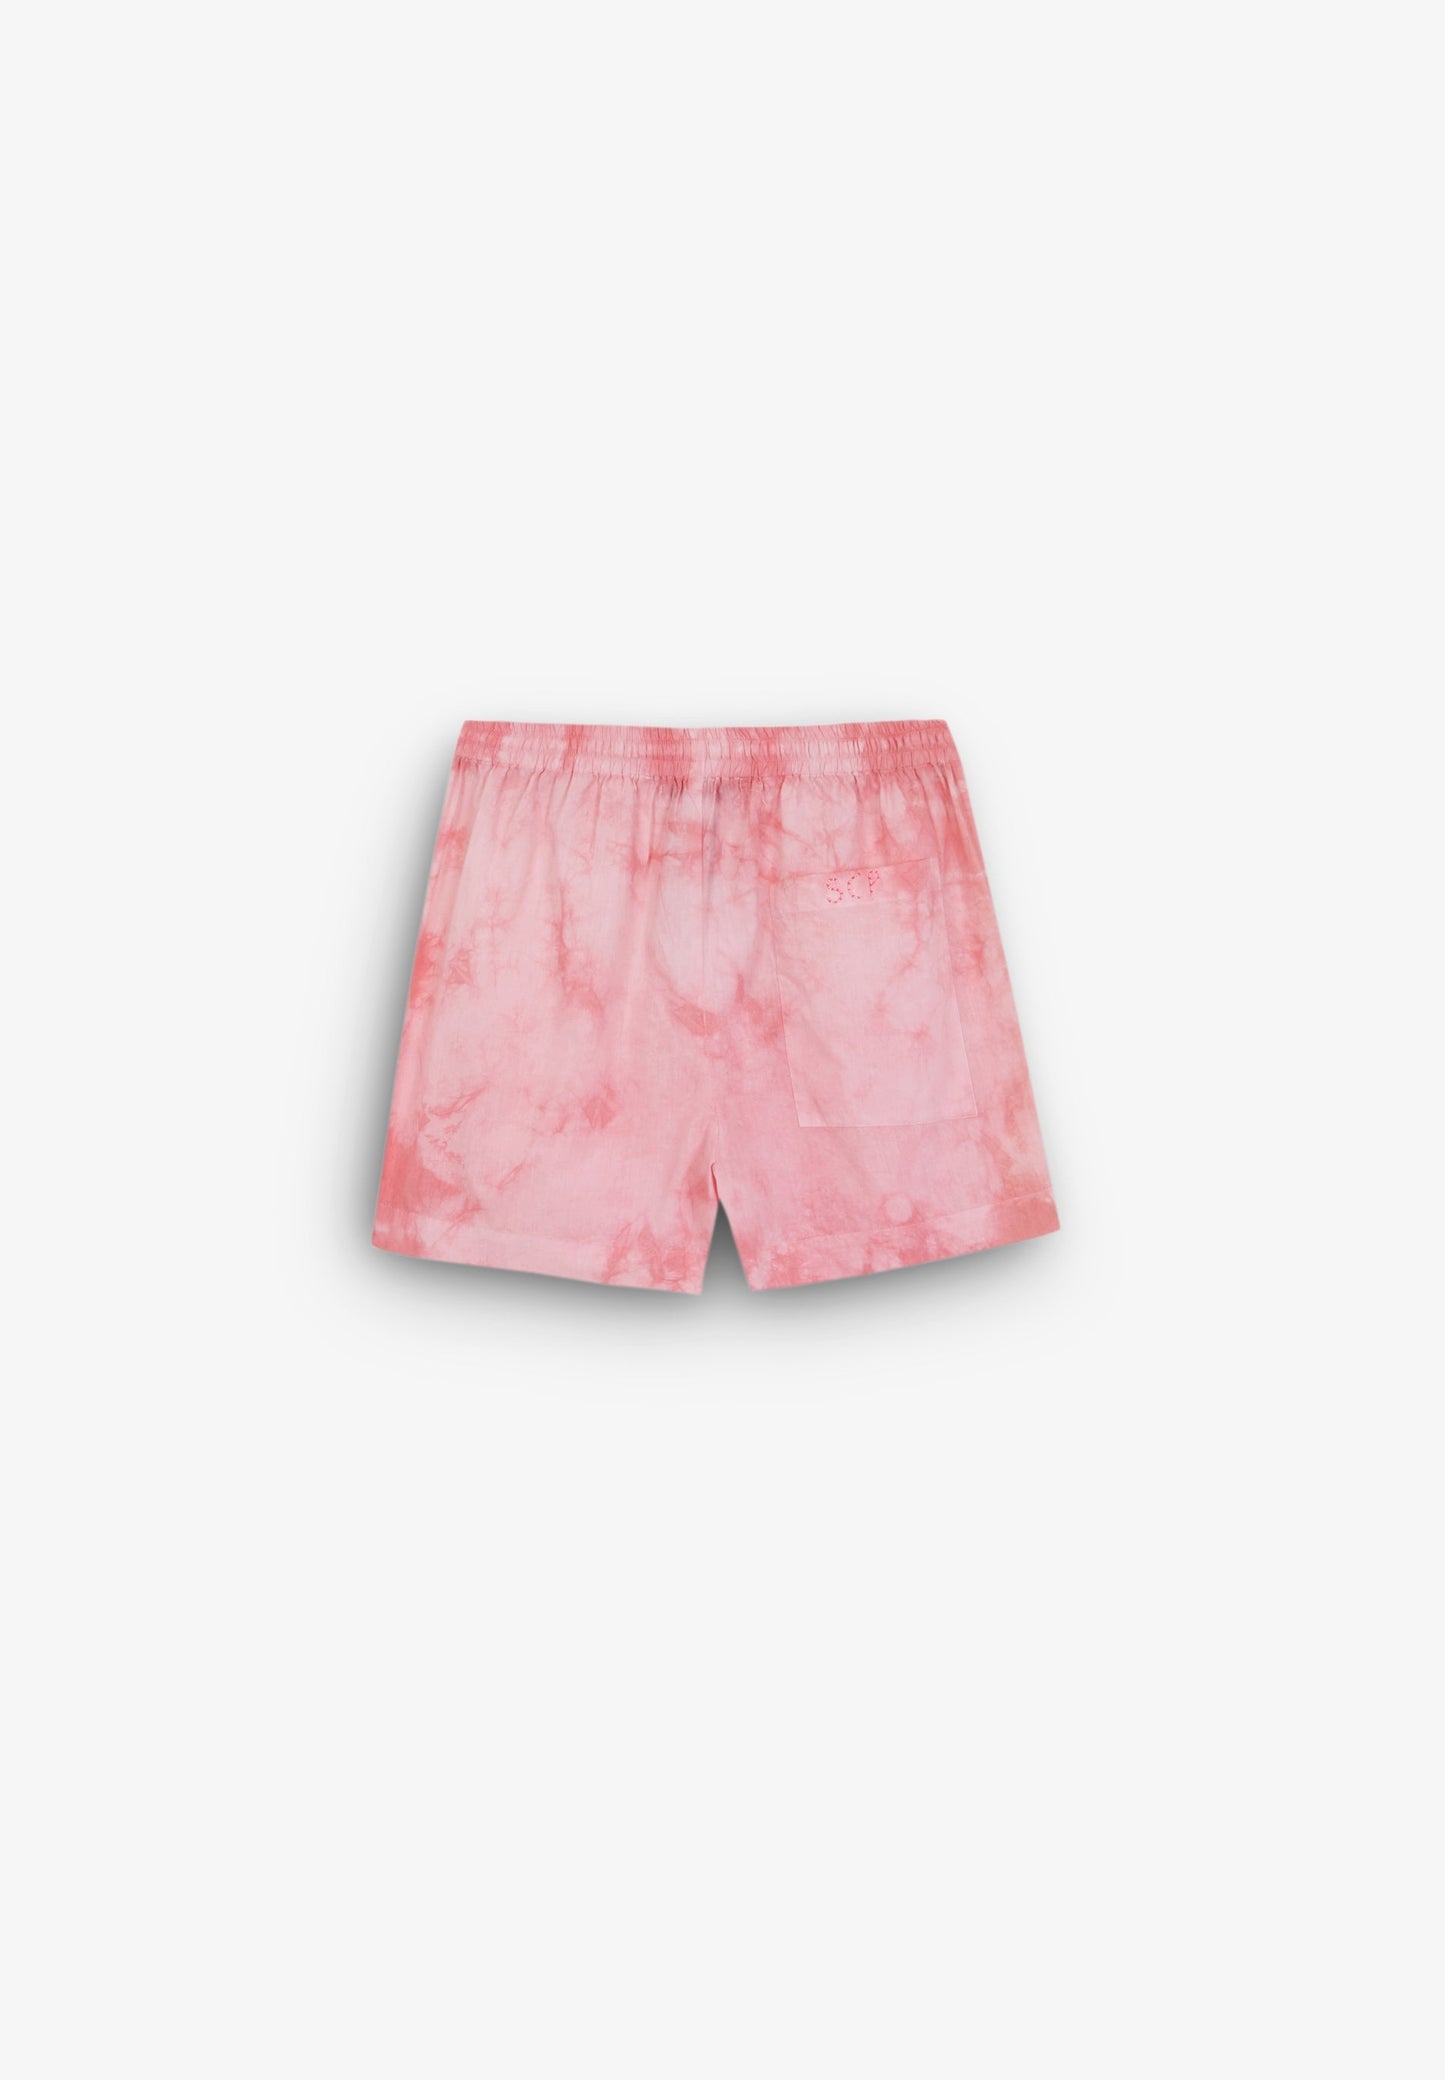 TIE-DYE SHORTS WITH BEADS